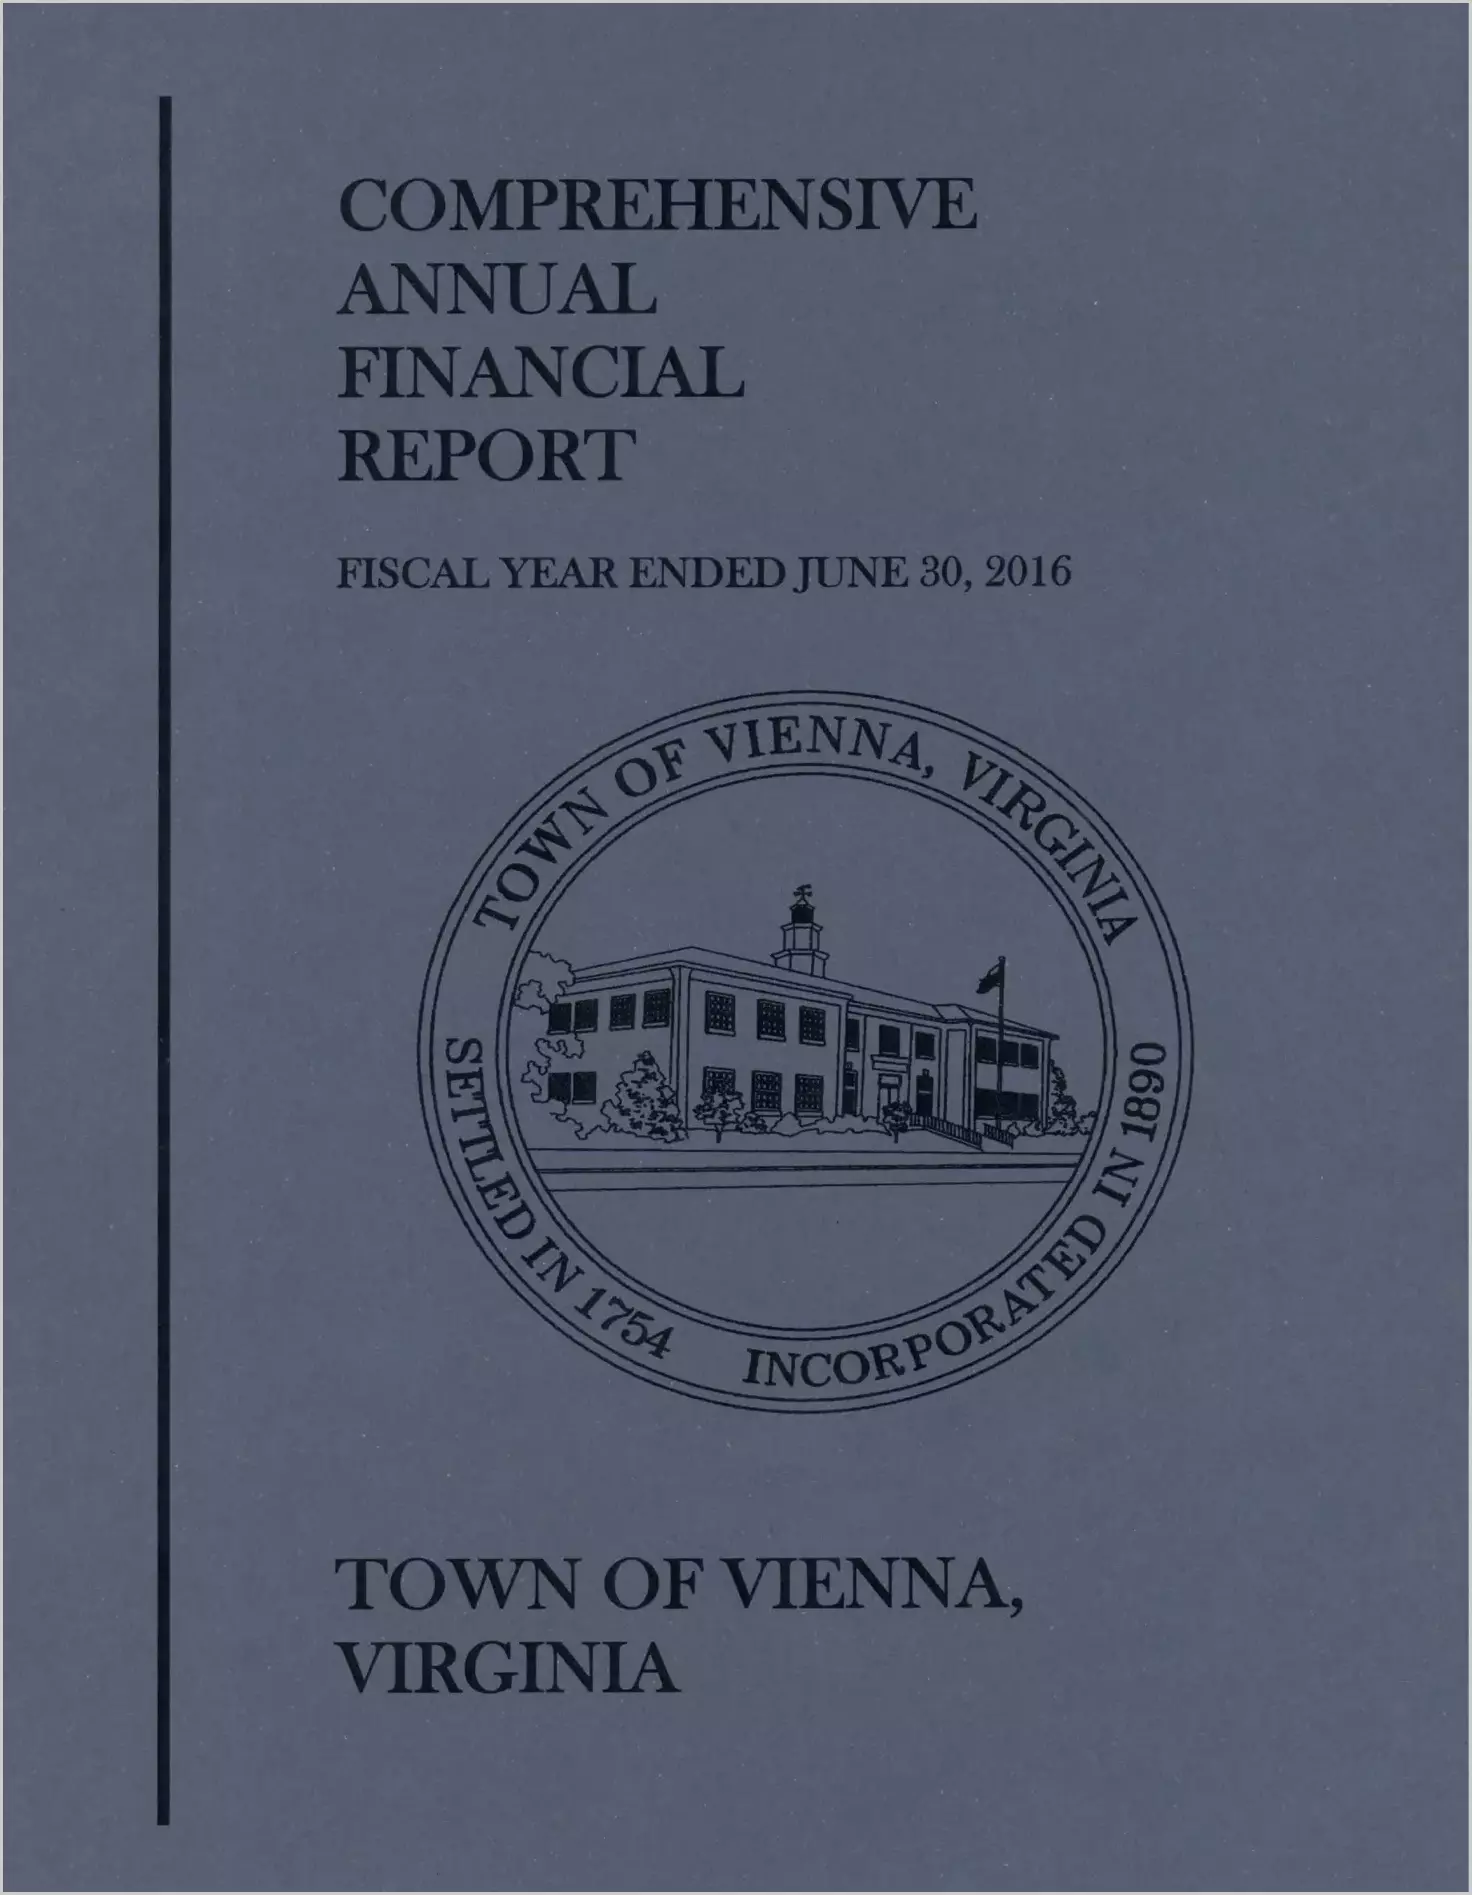 2016 Annual Financial Report for Town of Vienna